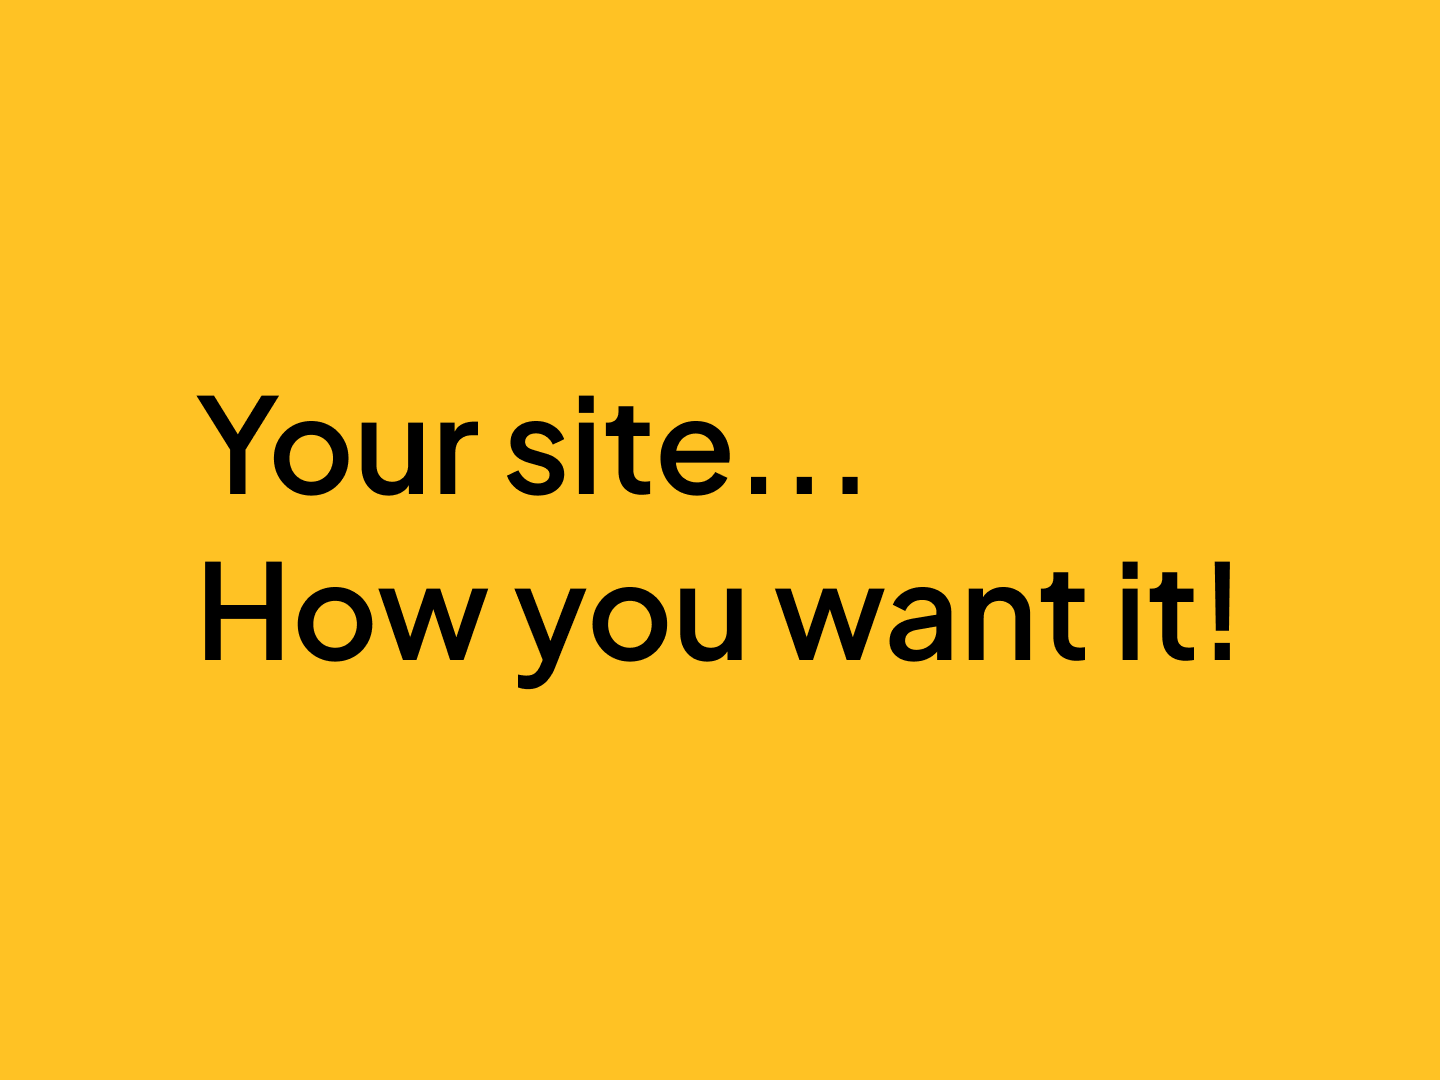 Descriptive image that says Your site... how you want it